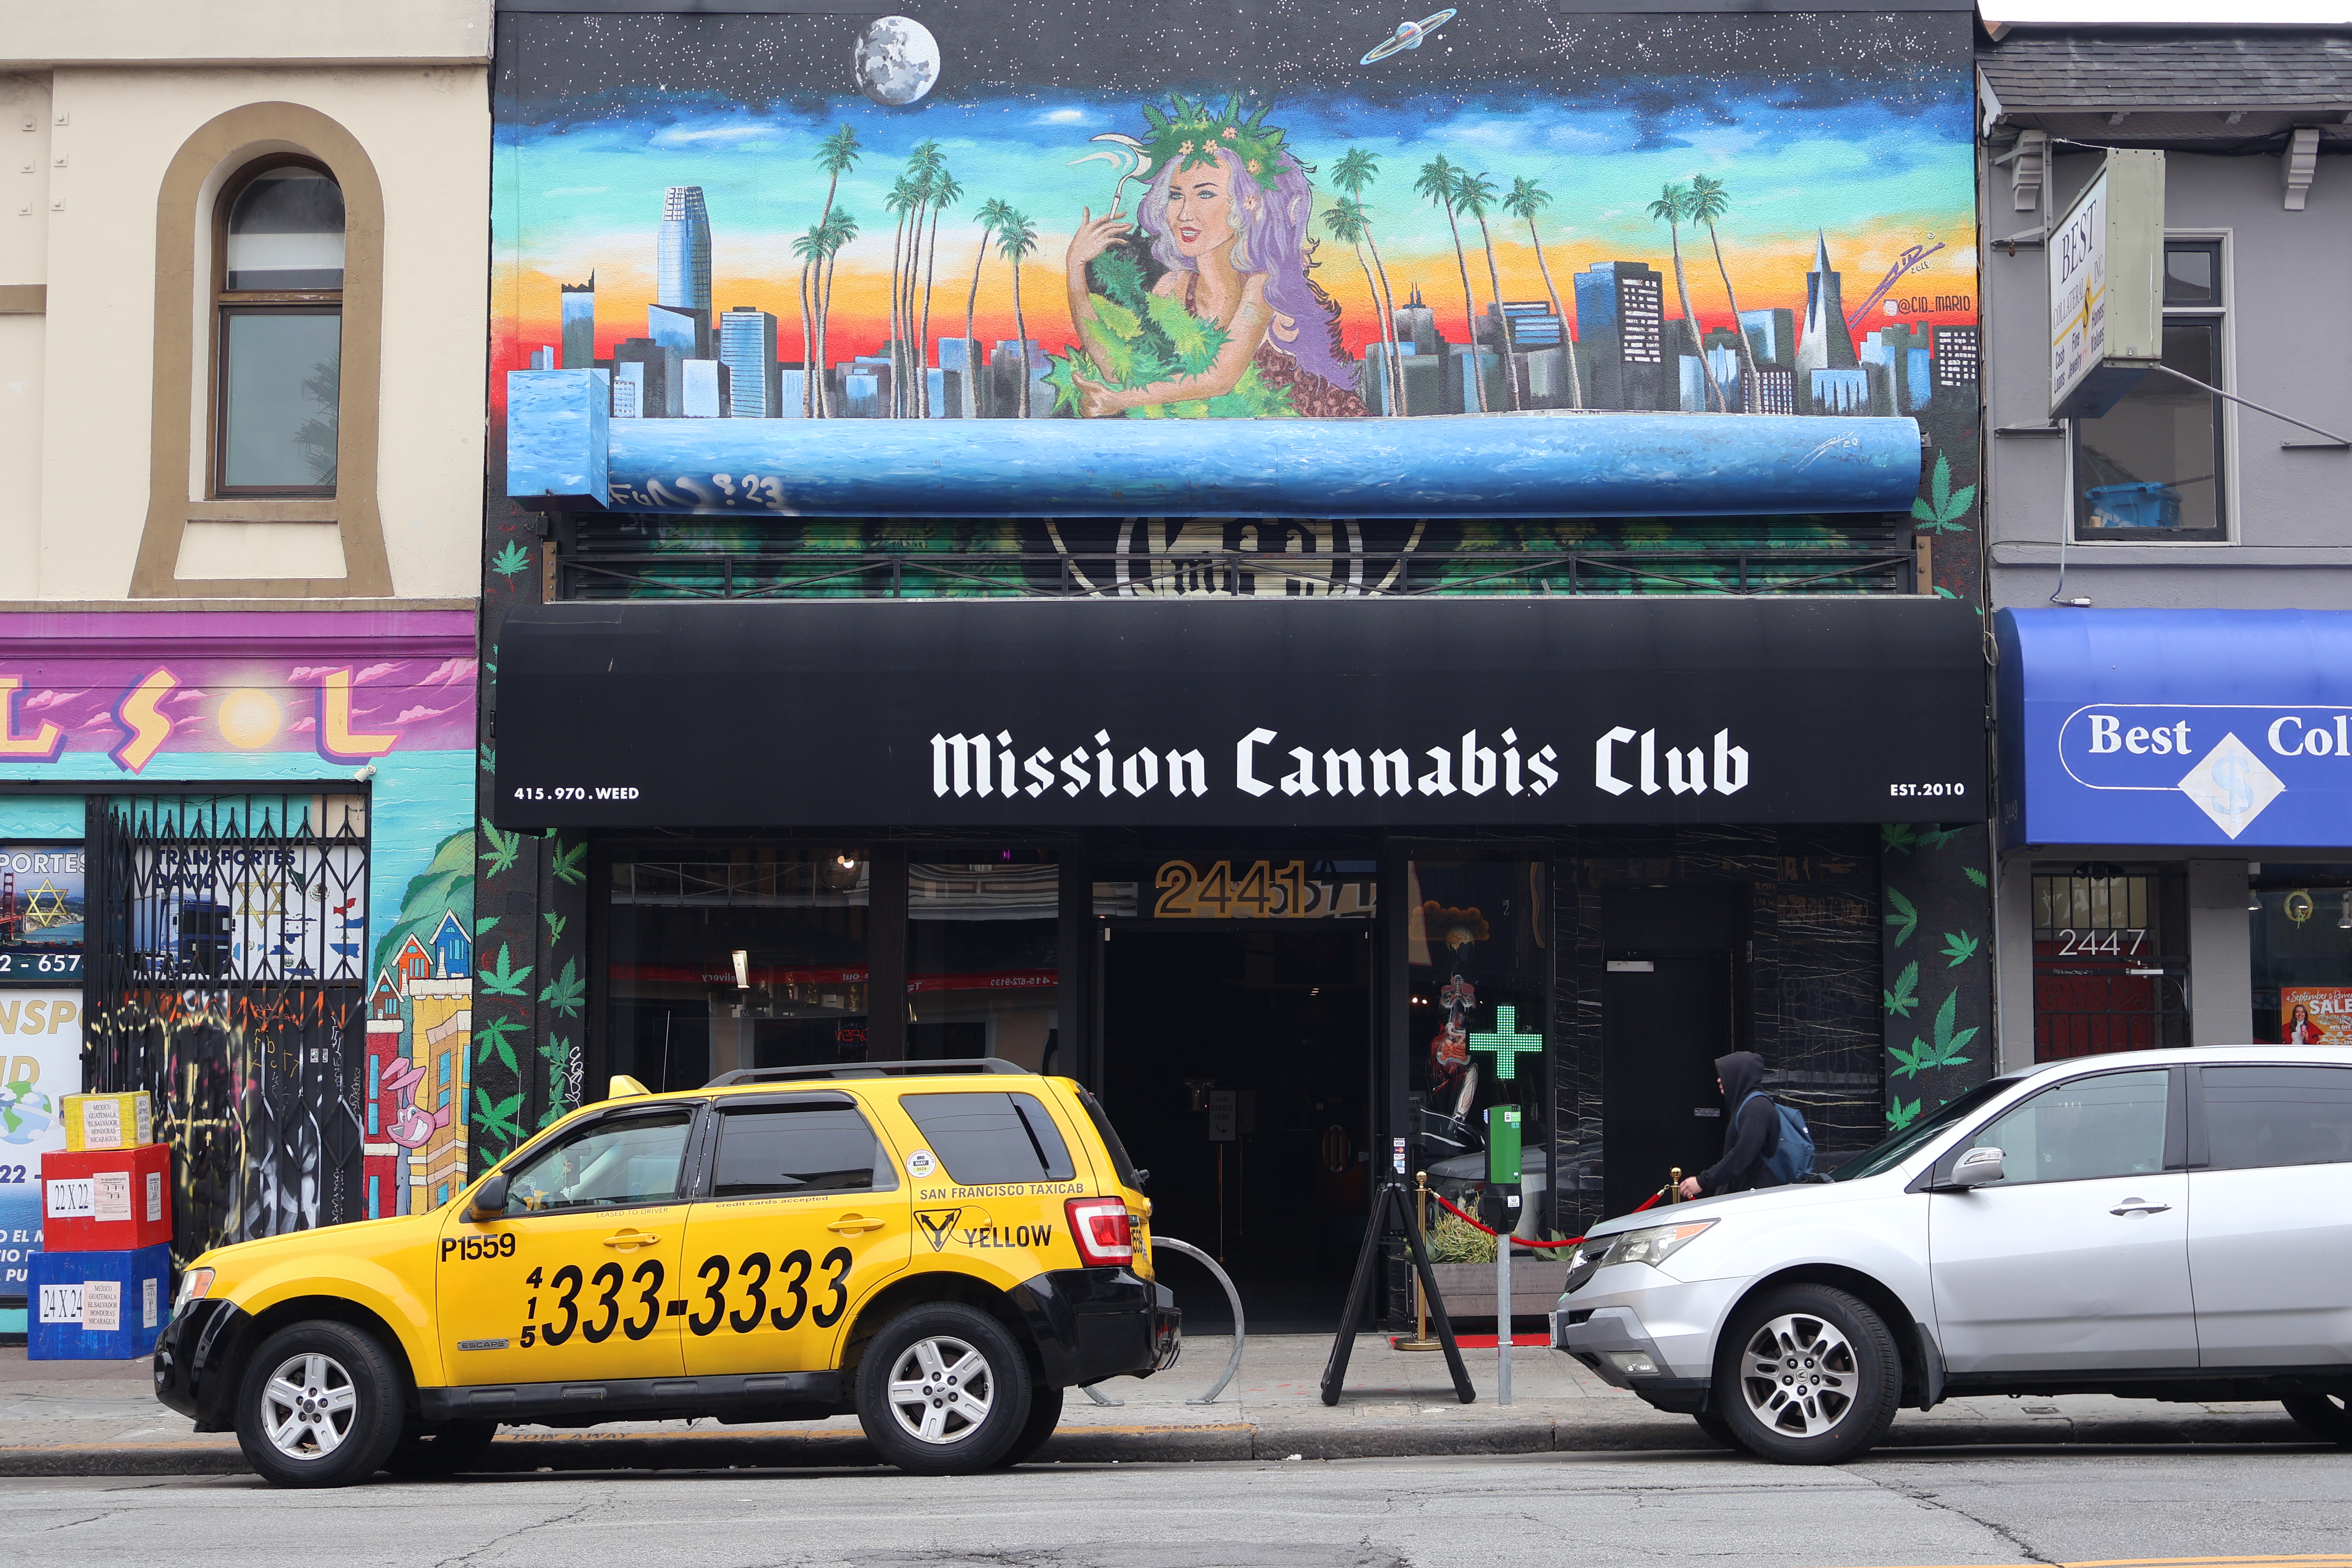 The storefront of Mission Cannabis Club with two cars parked in front of the building